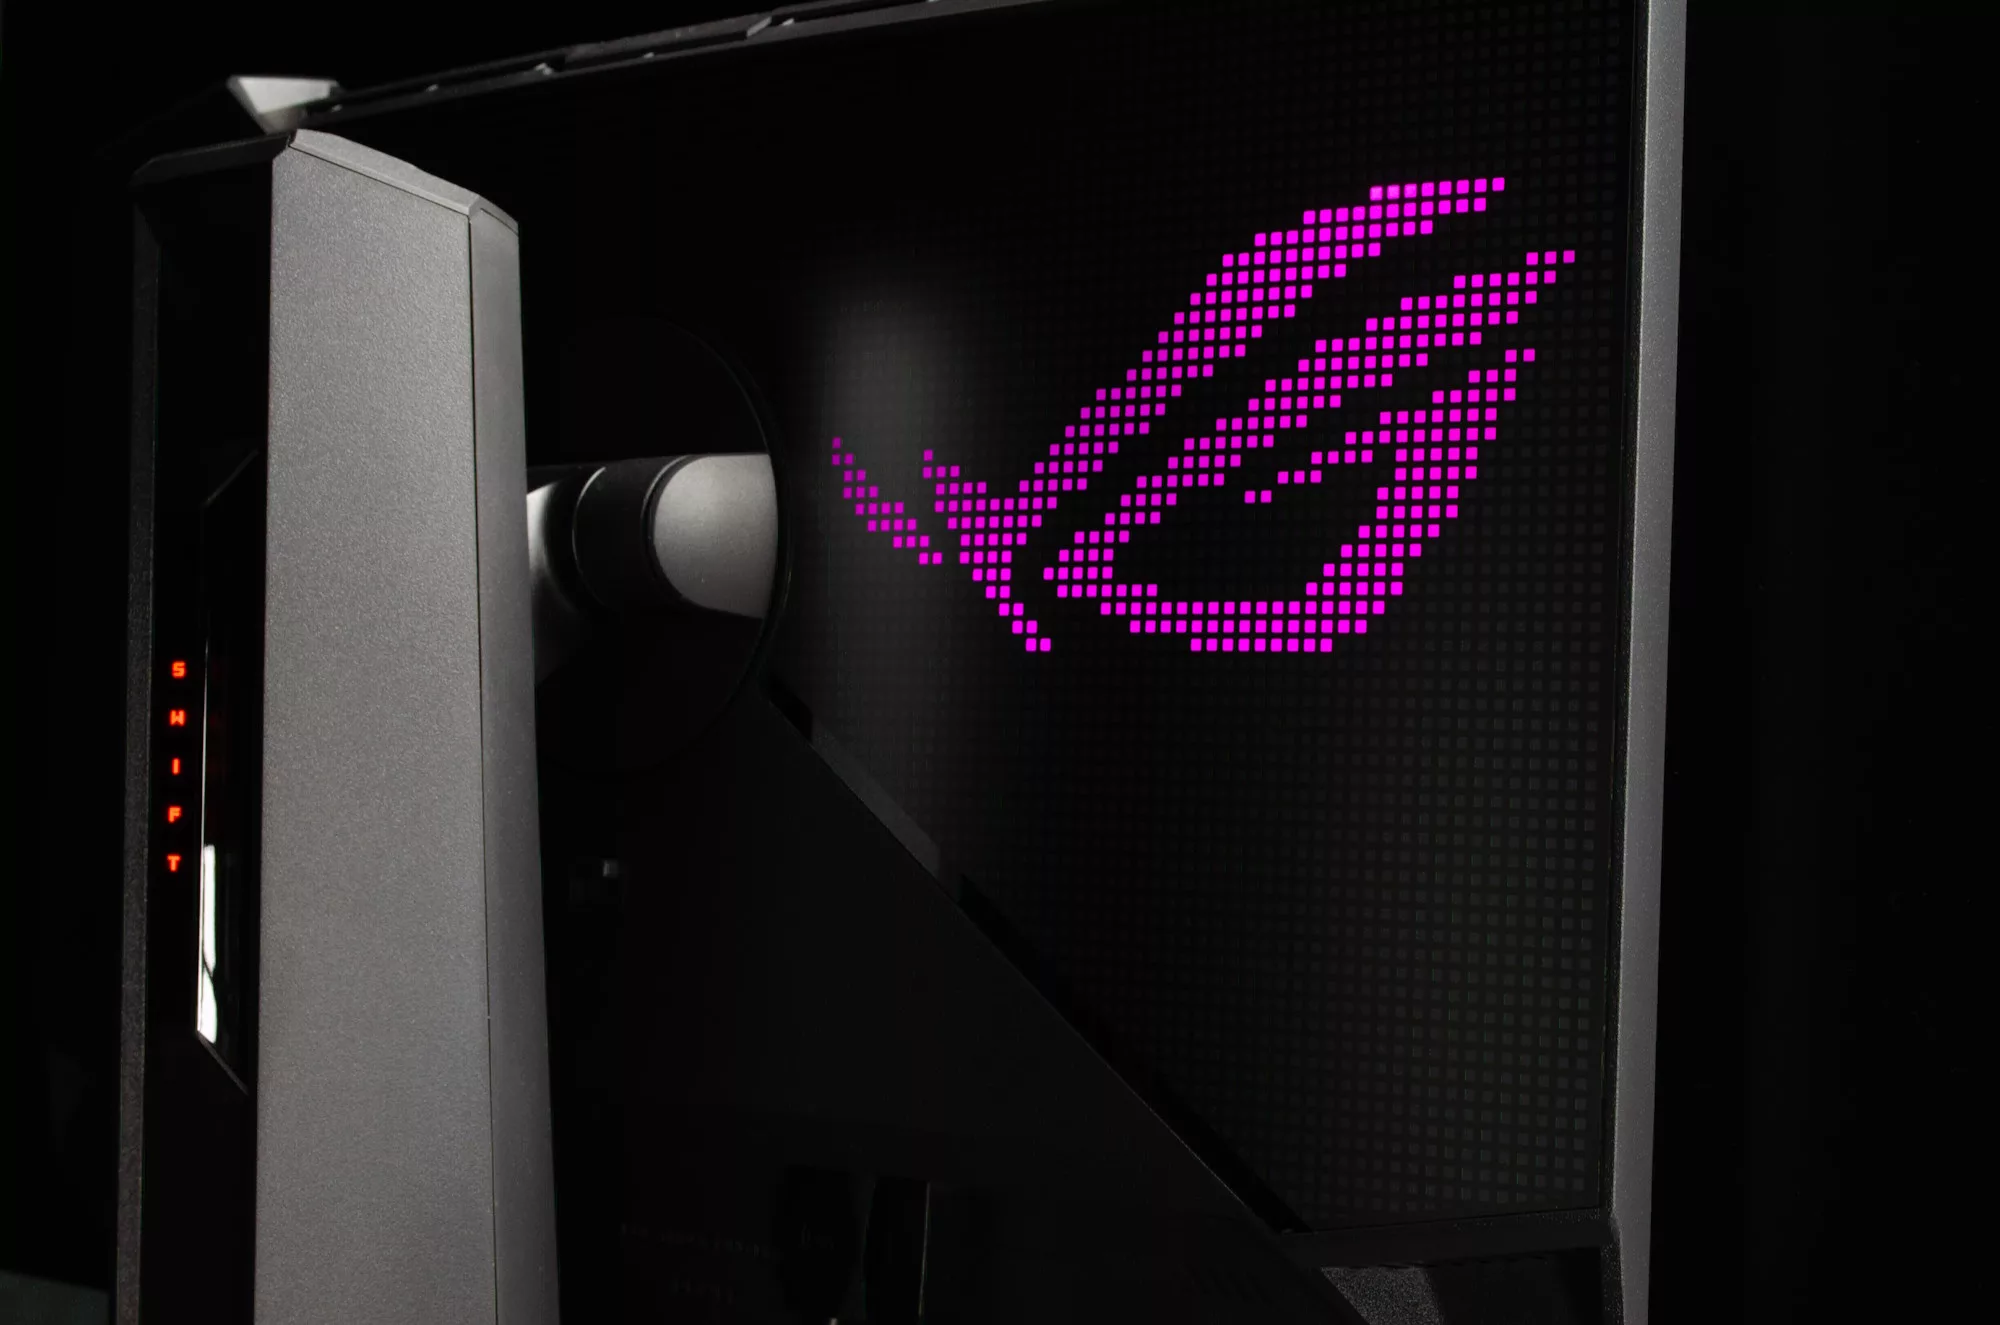 A view of the large, customizable ROG logo on the back of the PG27AQDM